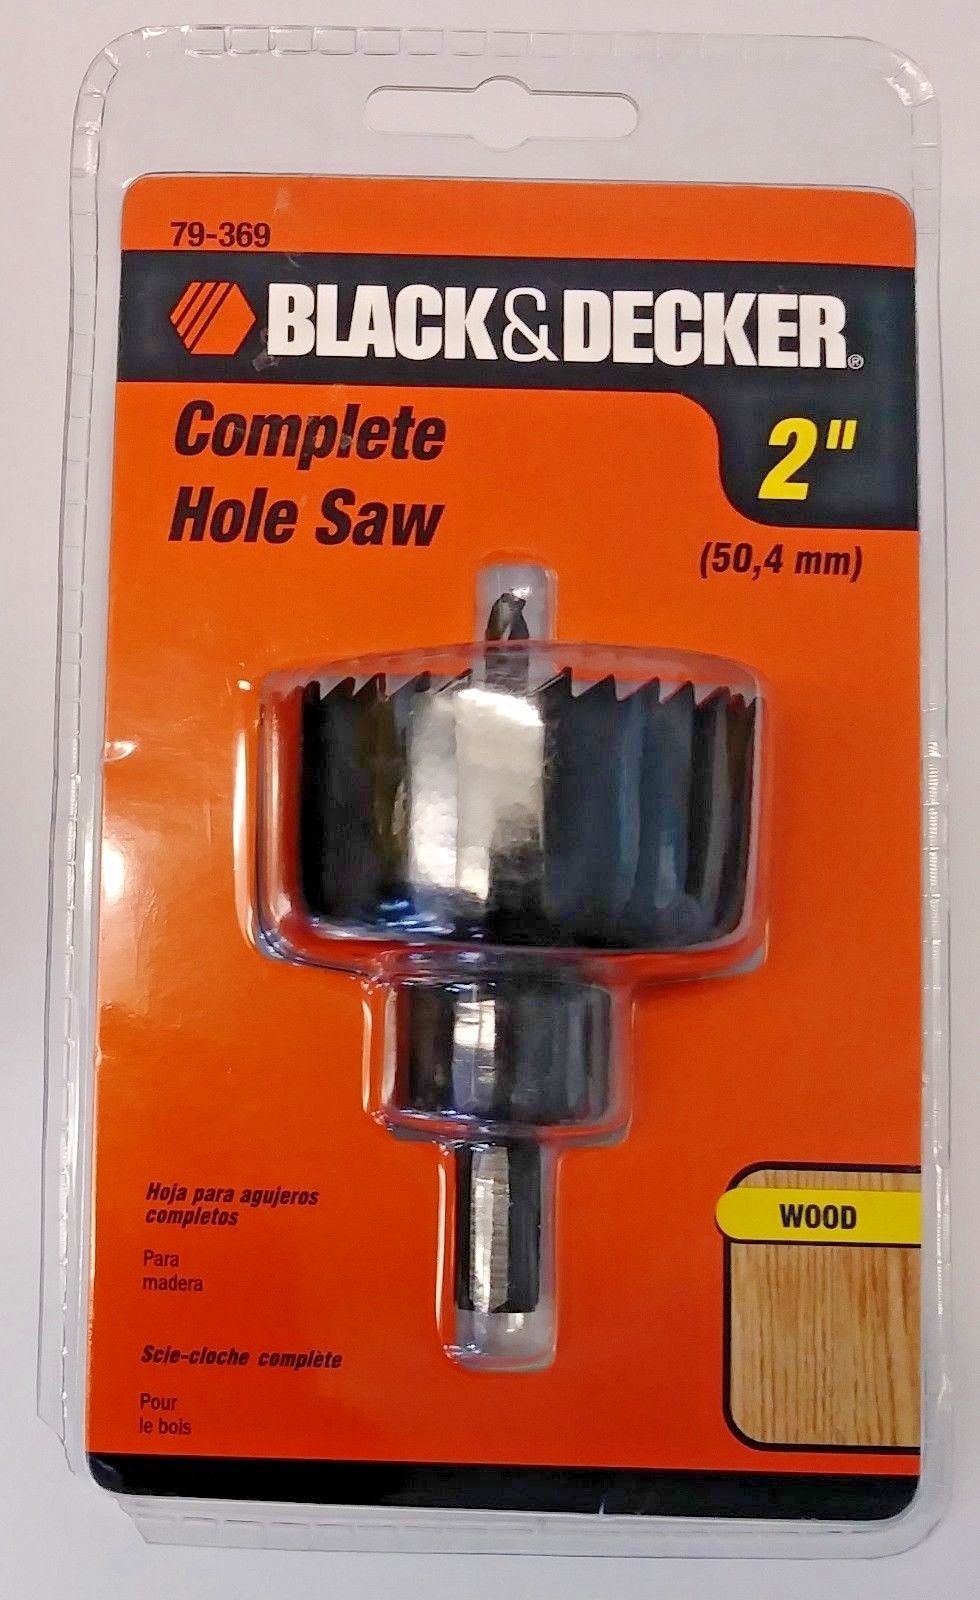 Black & Decker 79-369 2" Complete Wood Hole Saw With Mandrel